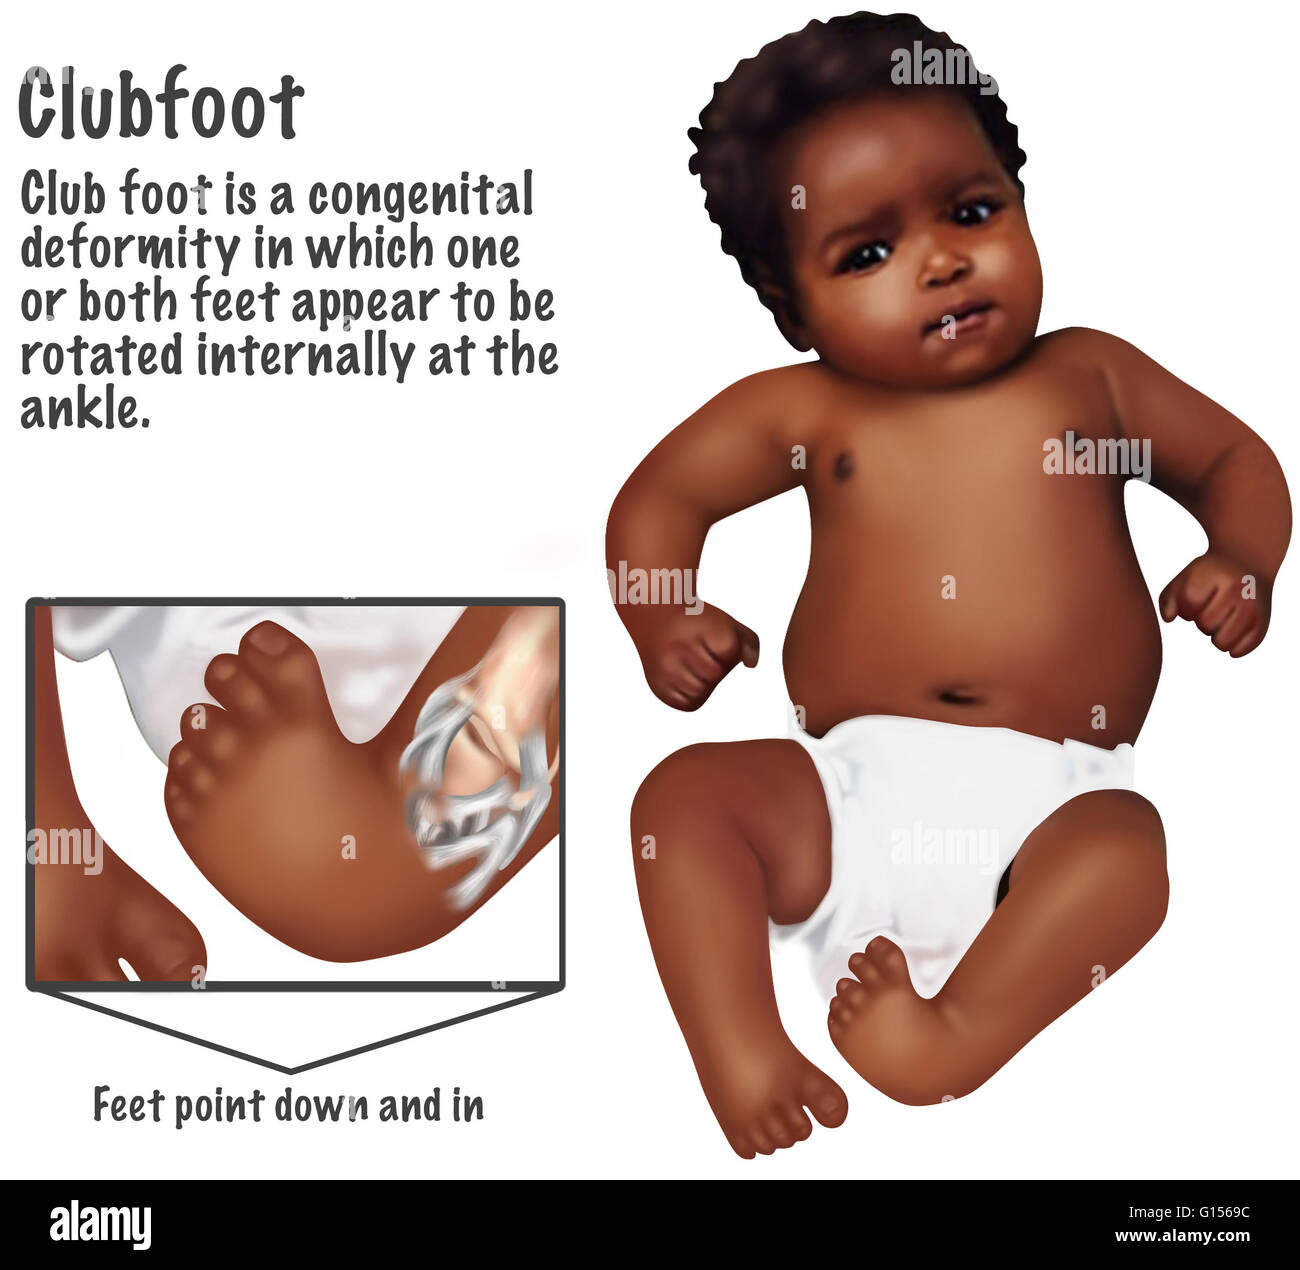 Illustration Of A Baby With A Club Foot Club Foot Or Club Feet Is A Congenital Deformity Which One Or Both Feet Appear To Be Rotated Internally At The Ankle It Is